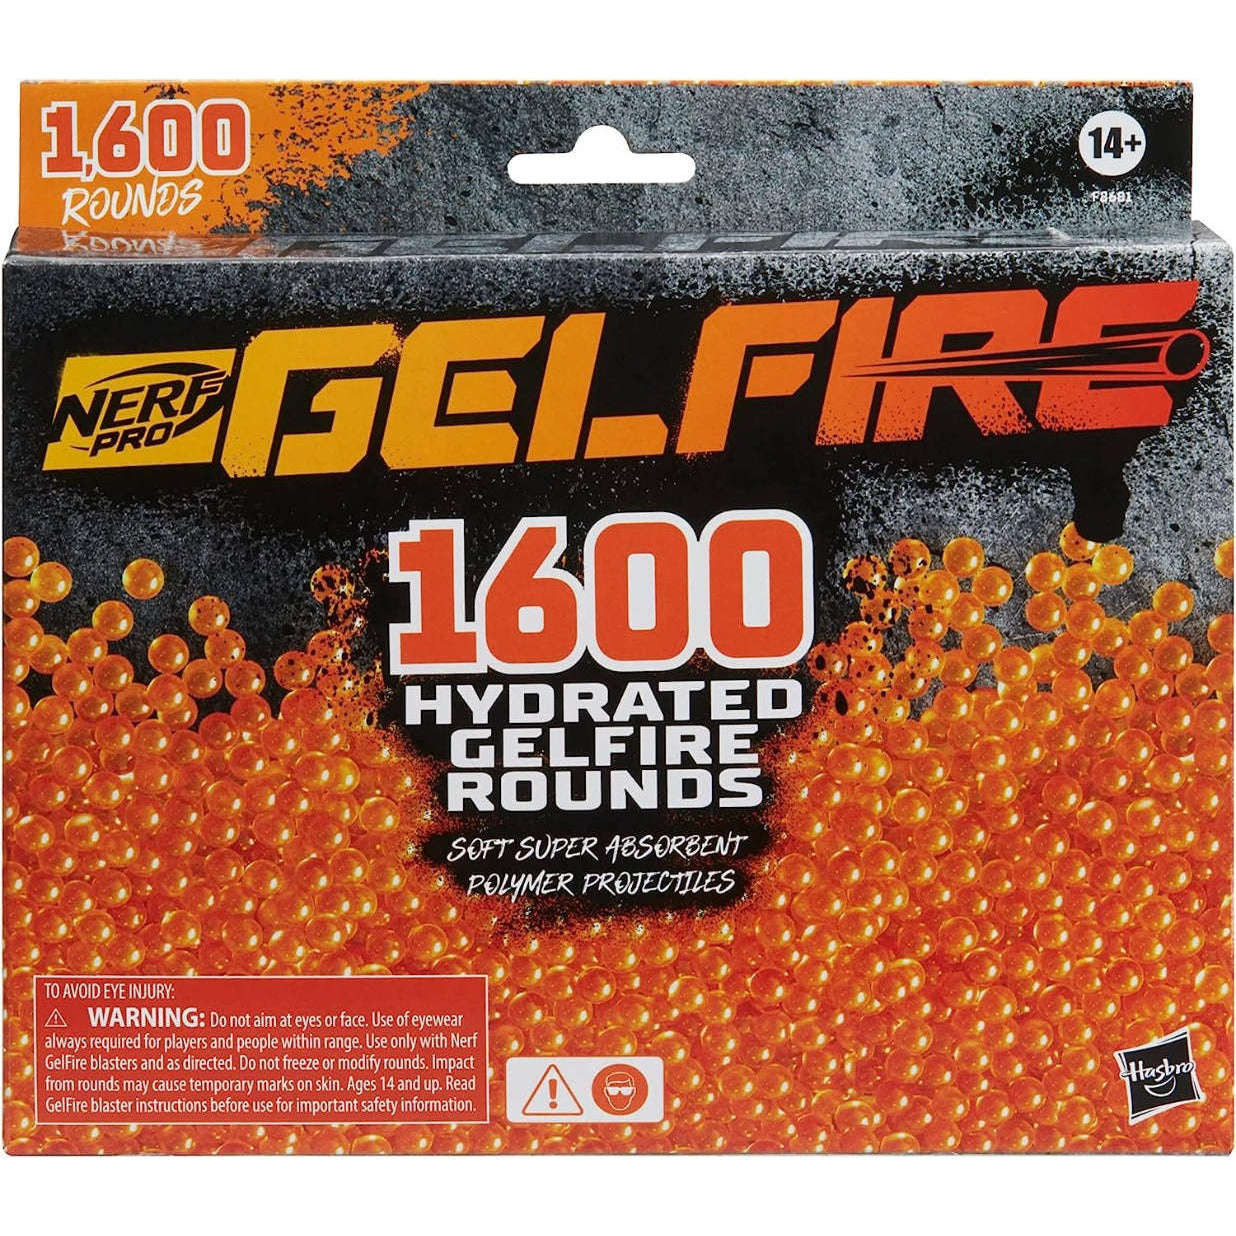 Toys N Tuck:Nerf Gelfire 1600 Hydrated Gelfire Rounds,Nerf